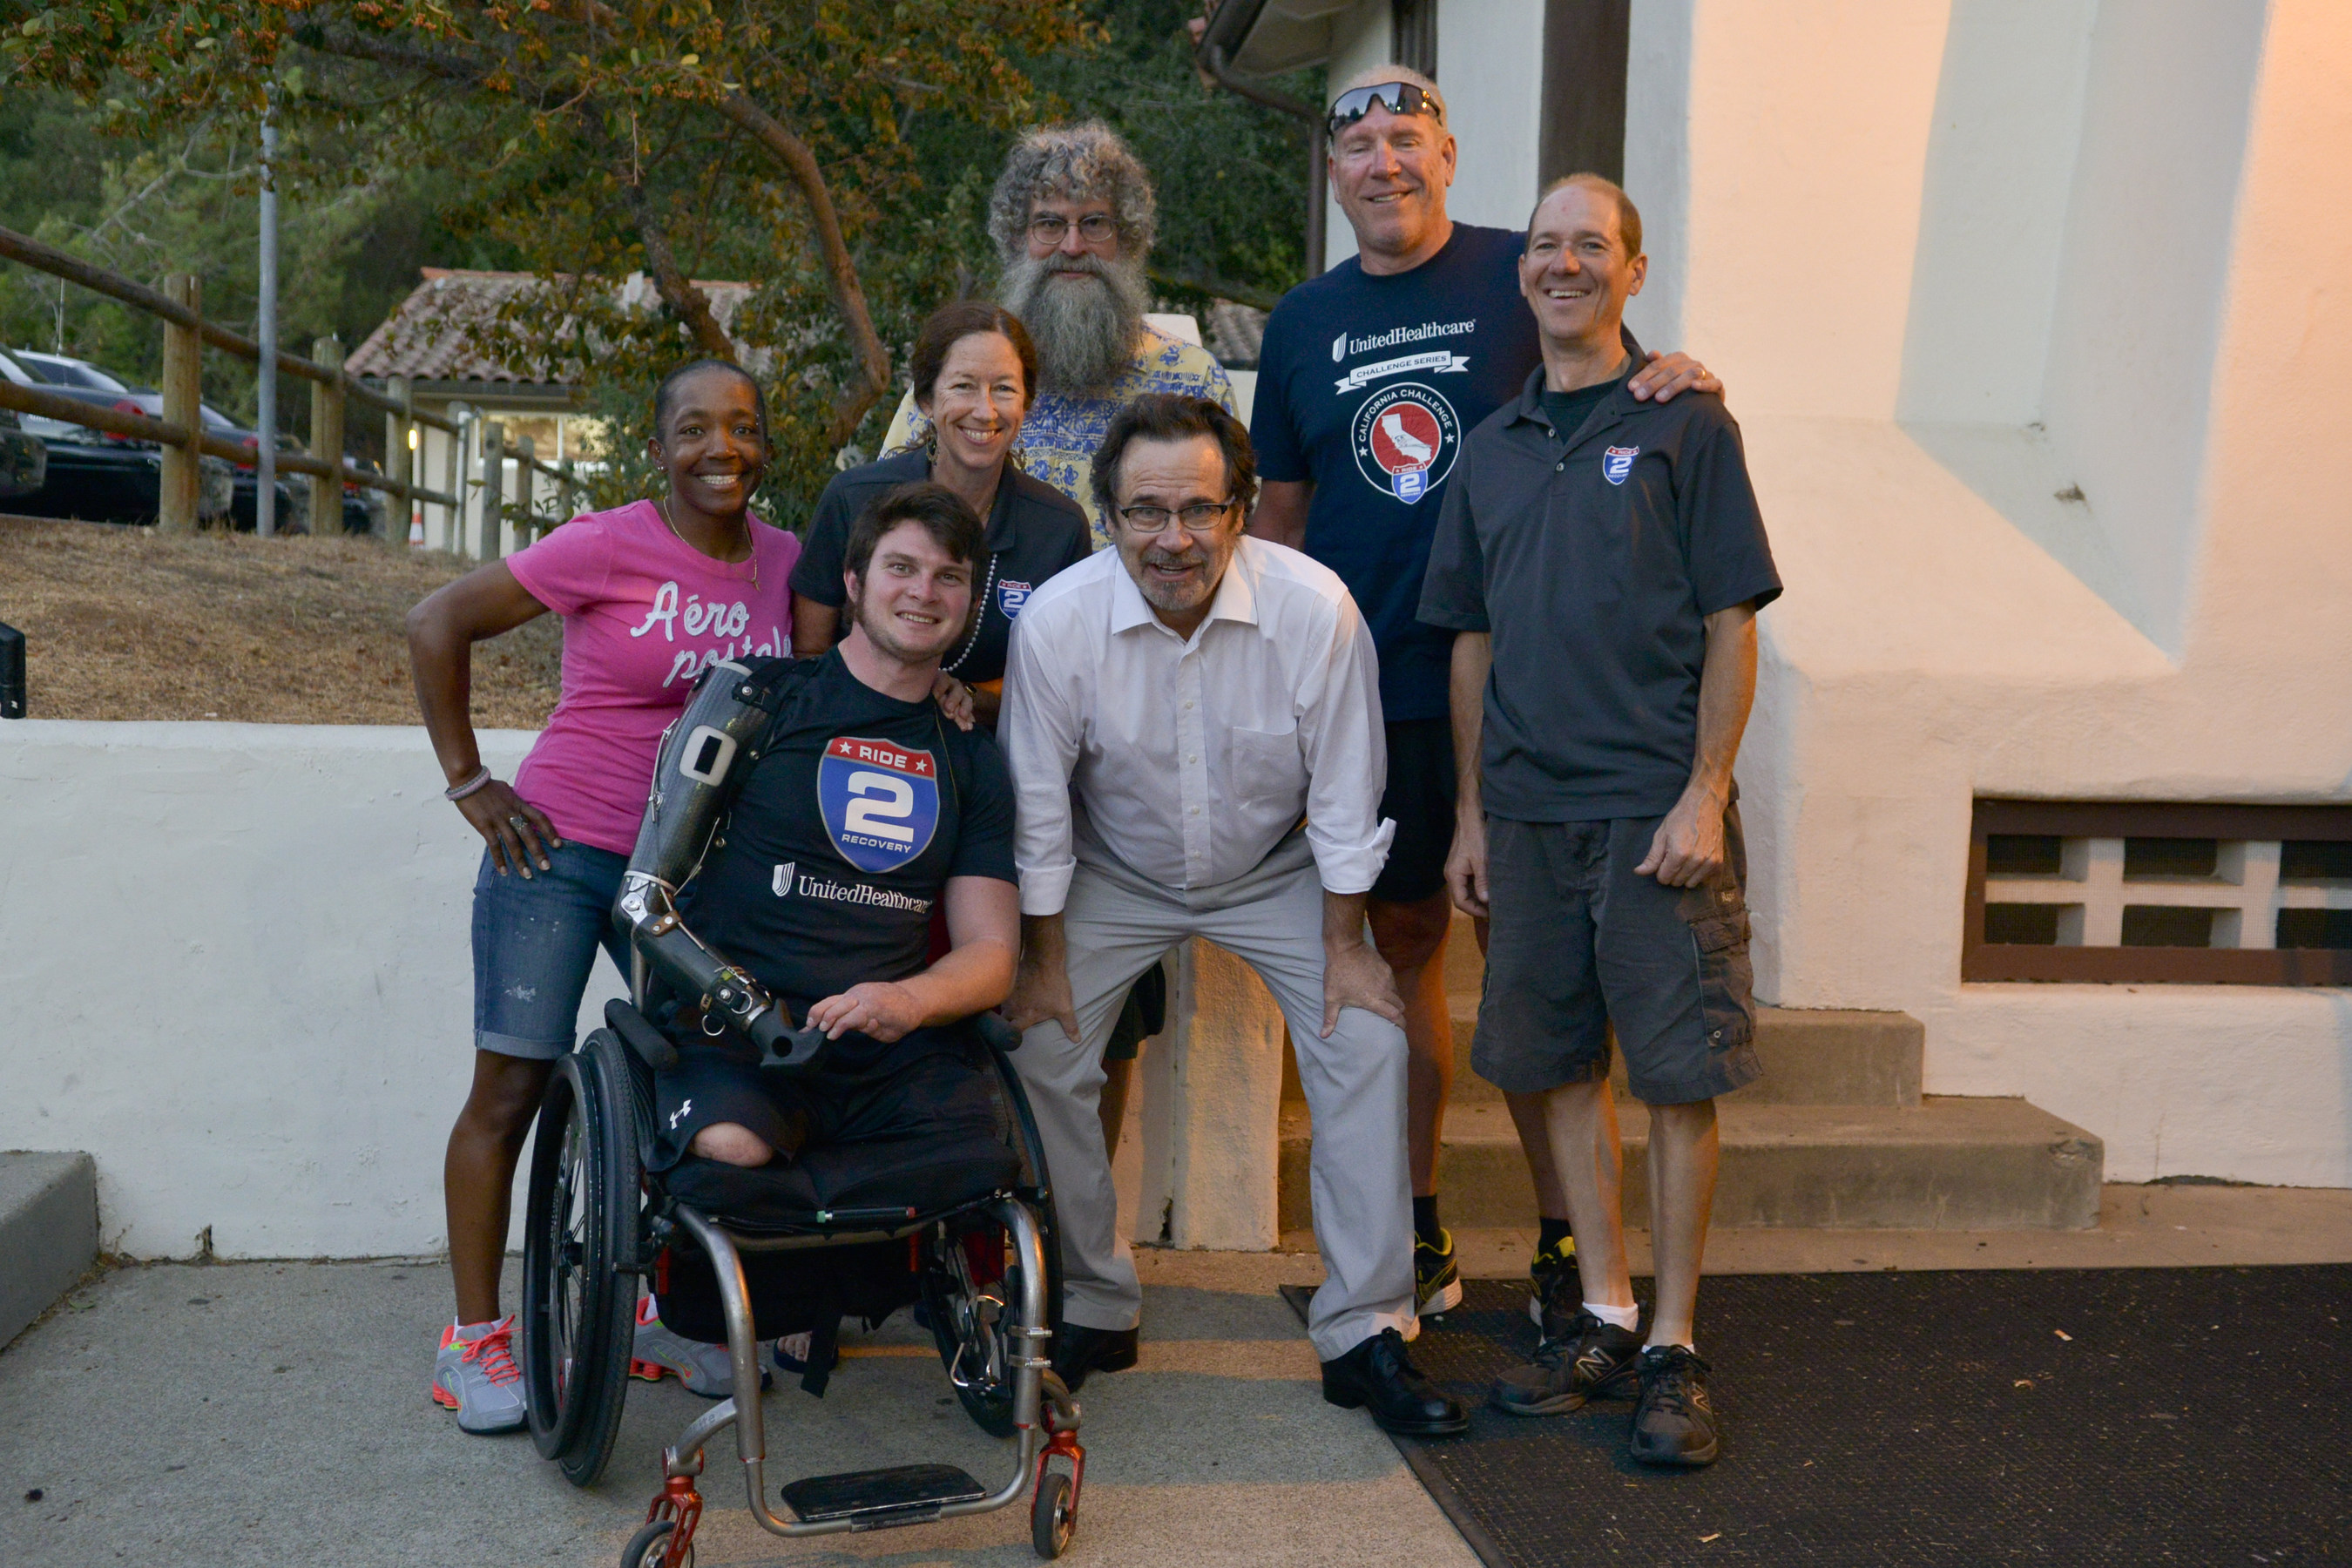 Comedian Dennis Miller's VETie in support of veterans and Ride 2 Recovery